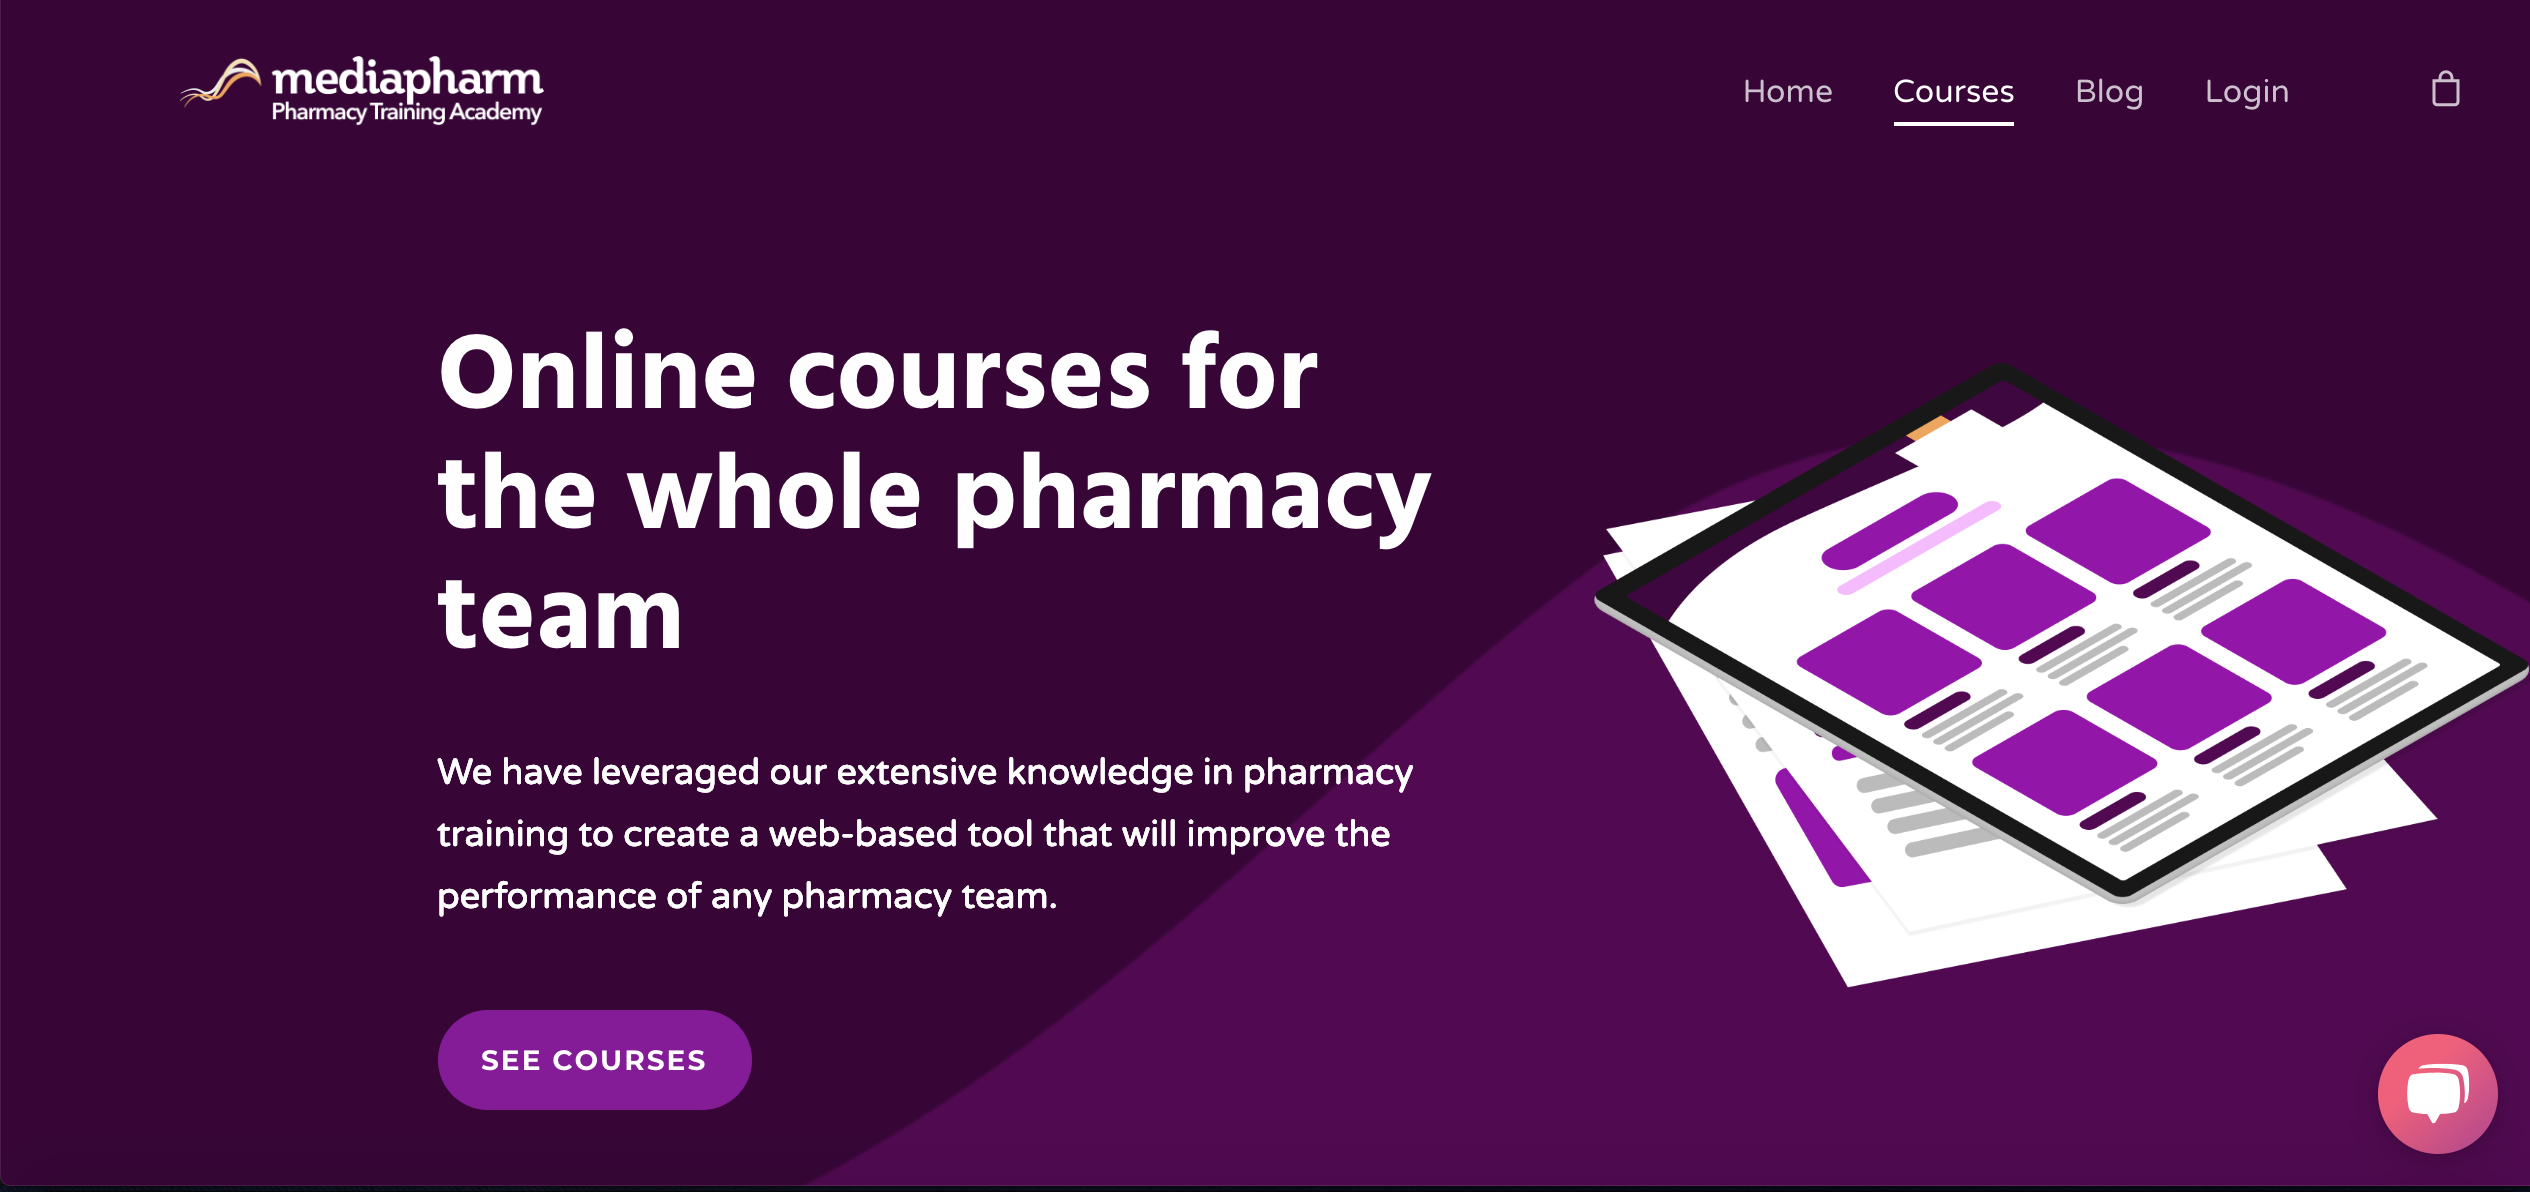 Online Courses for the whole Pharmacy Team - Mediapharm Training